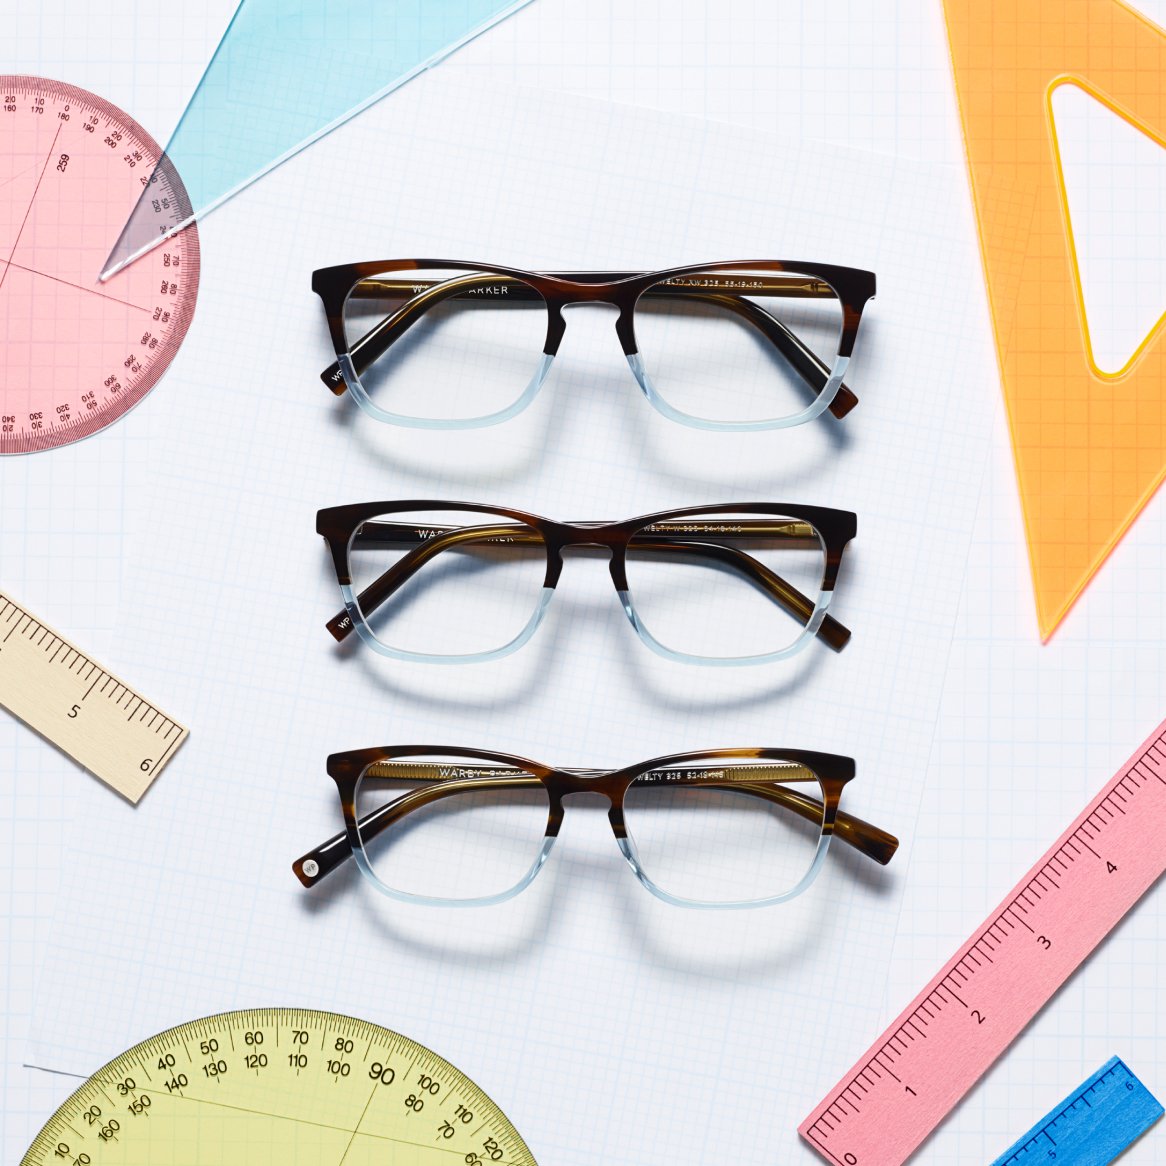 Glasses Measurements: How to Find Your Size